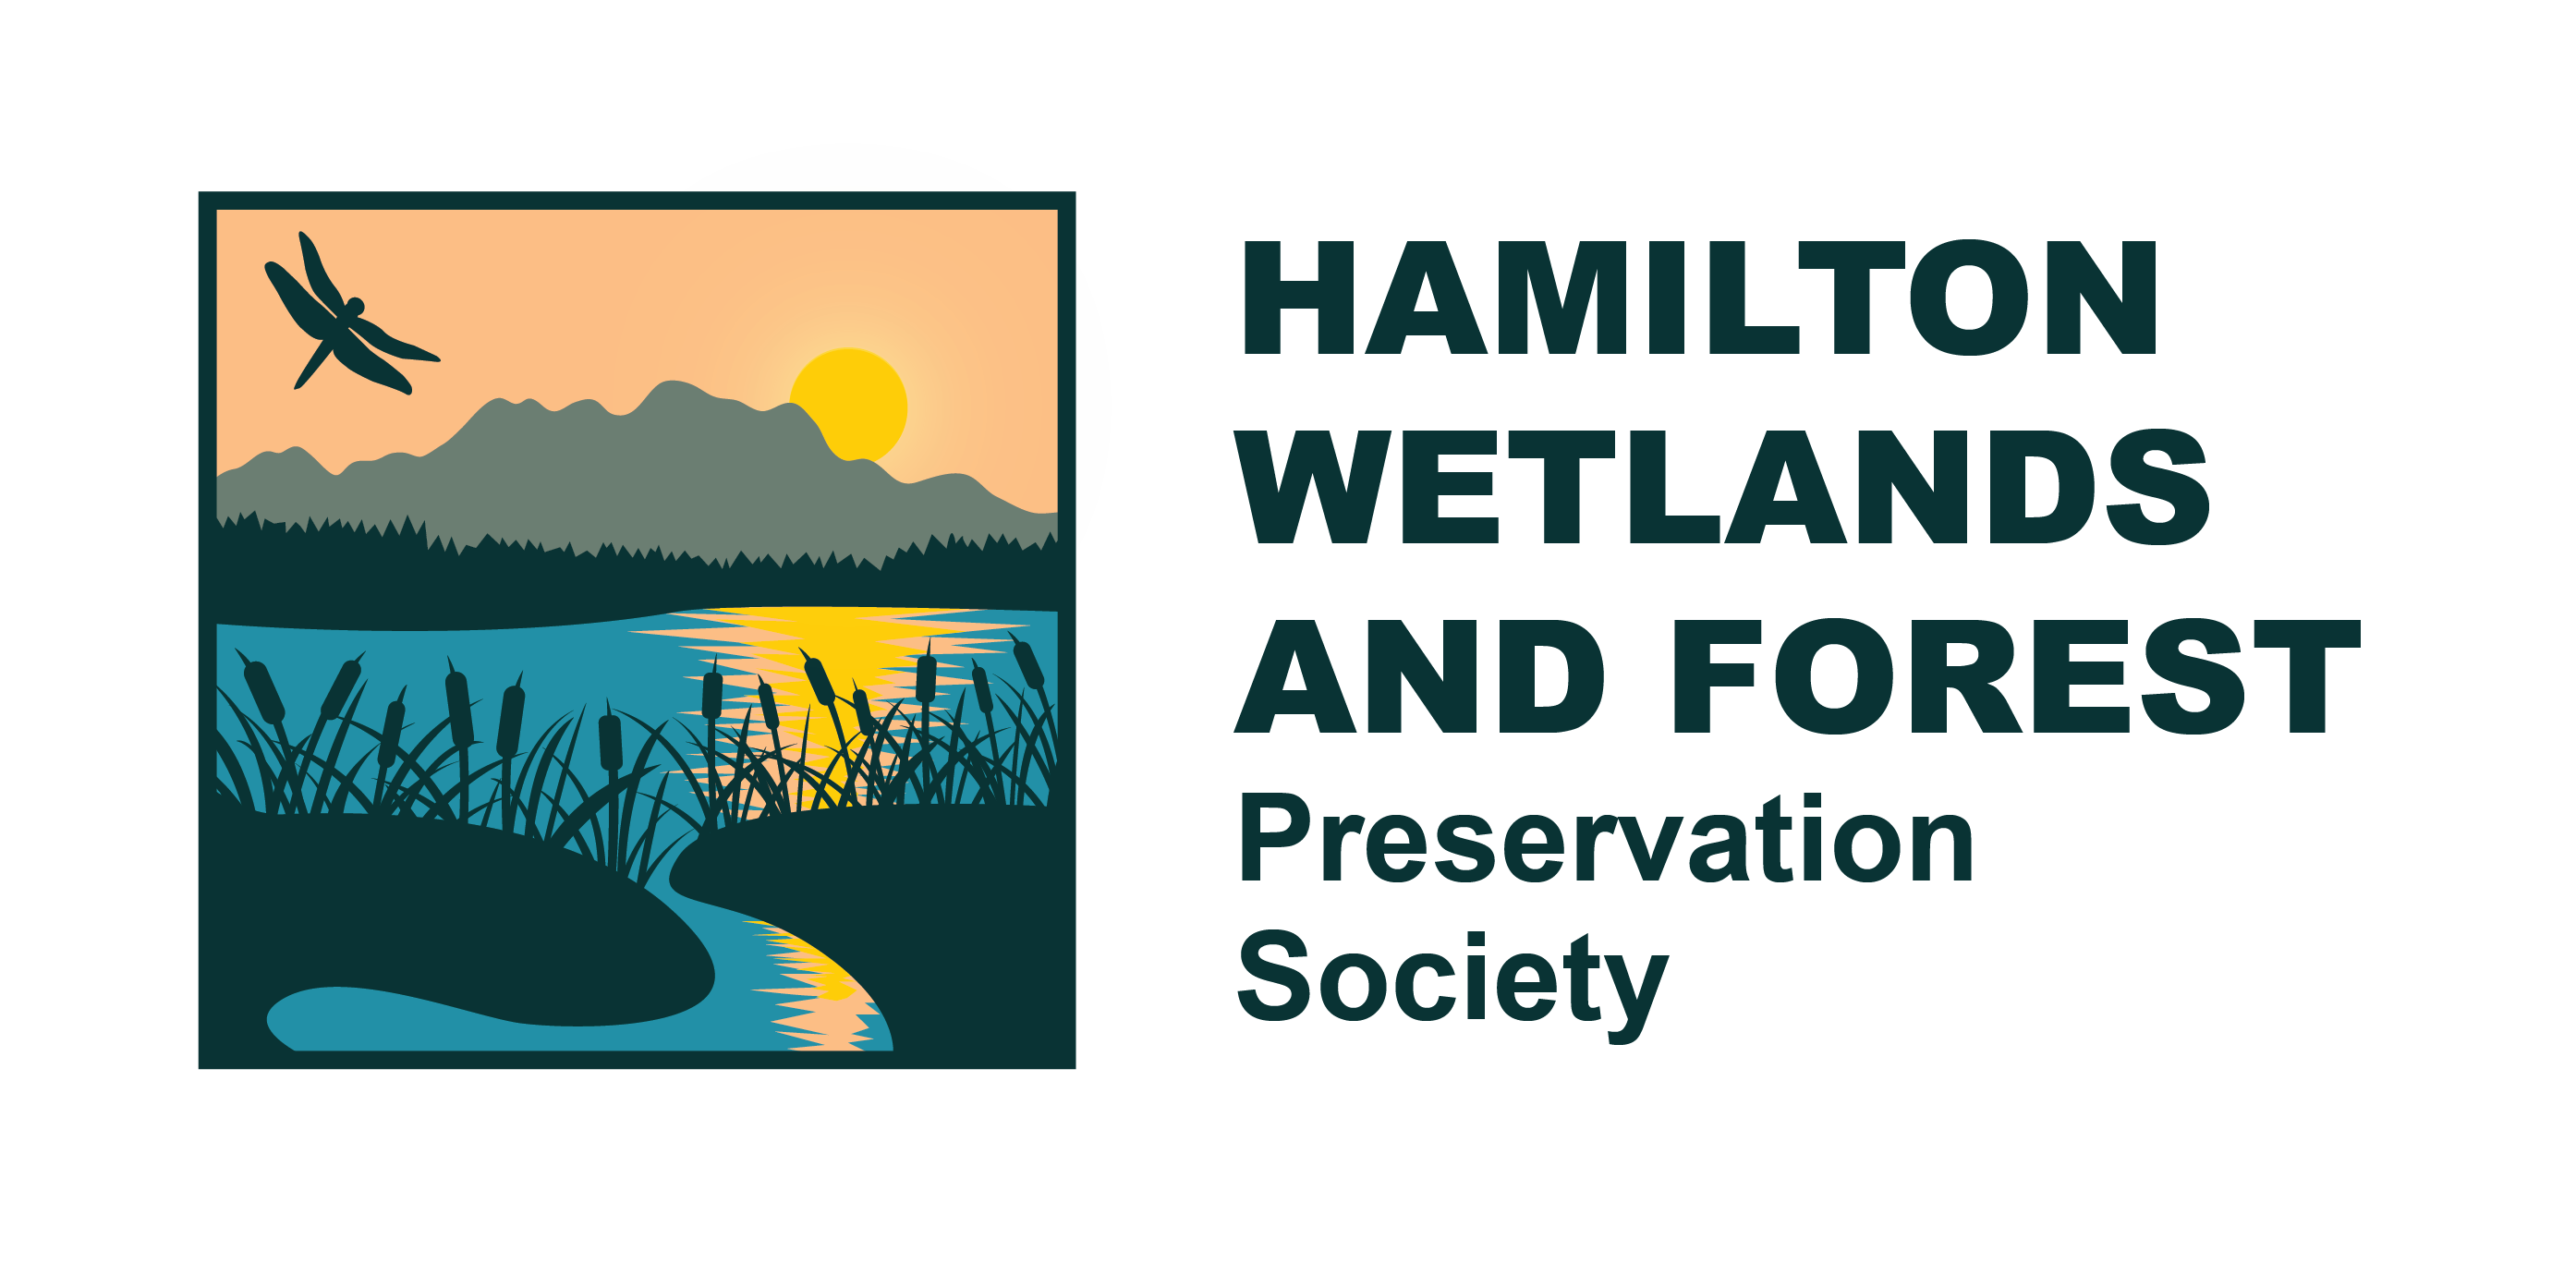 Hamilton Wetlands and Forest Preservation Society